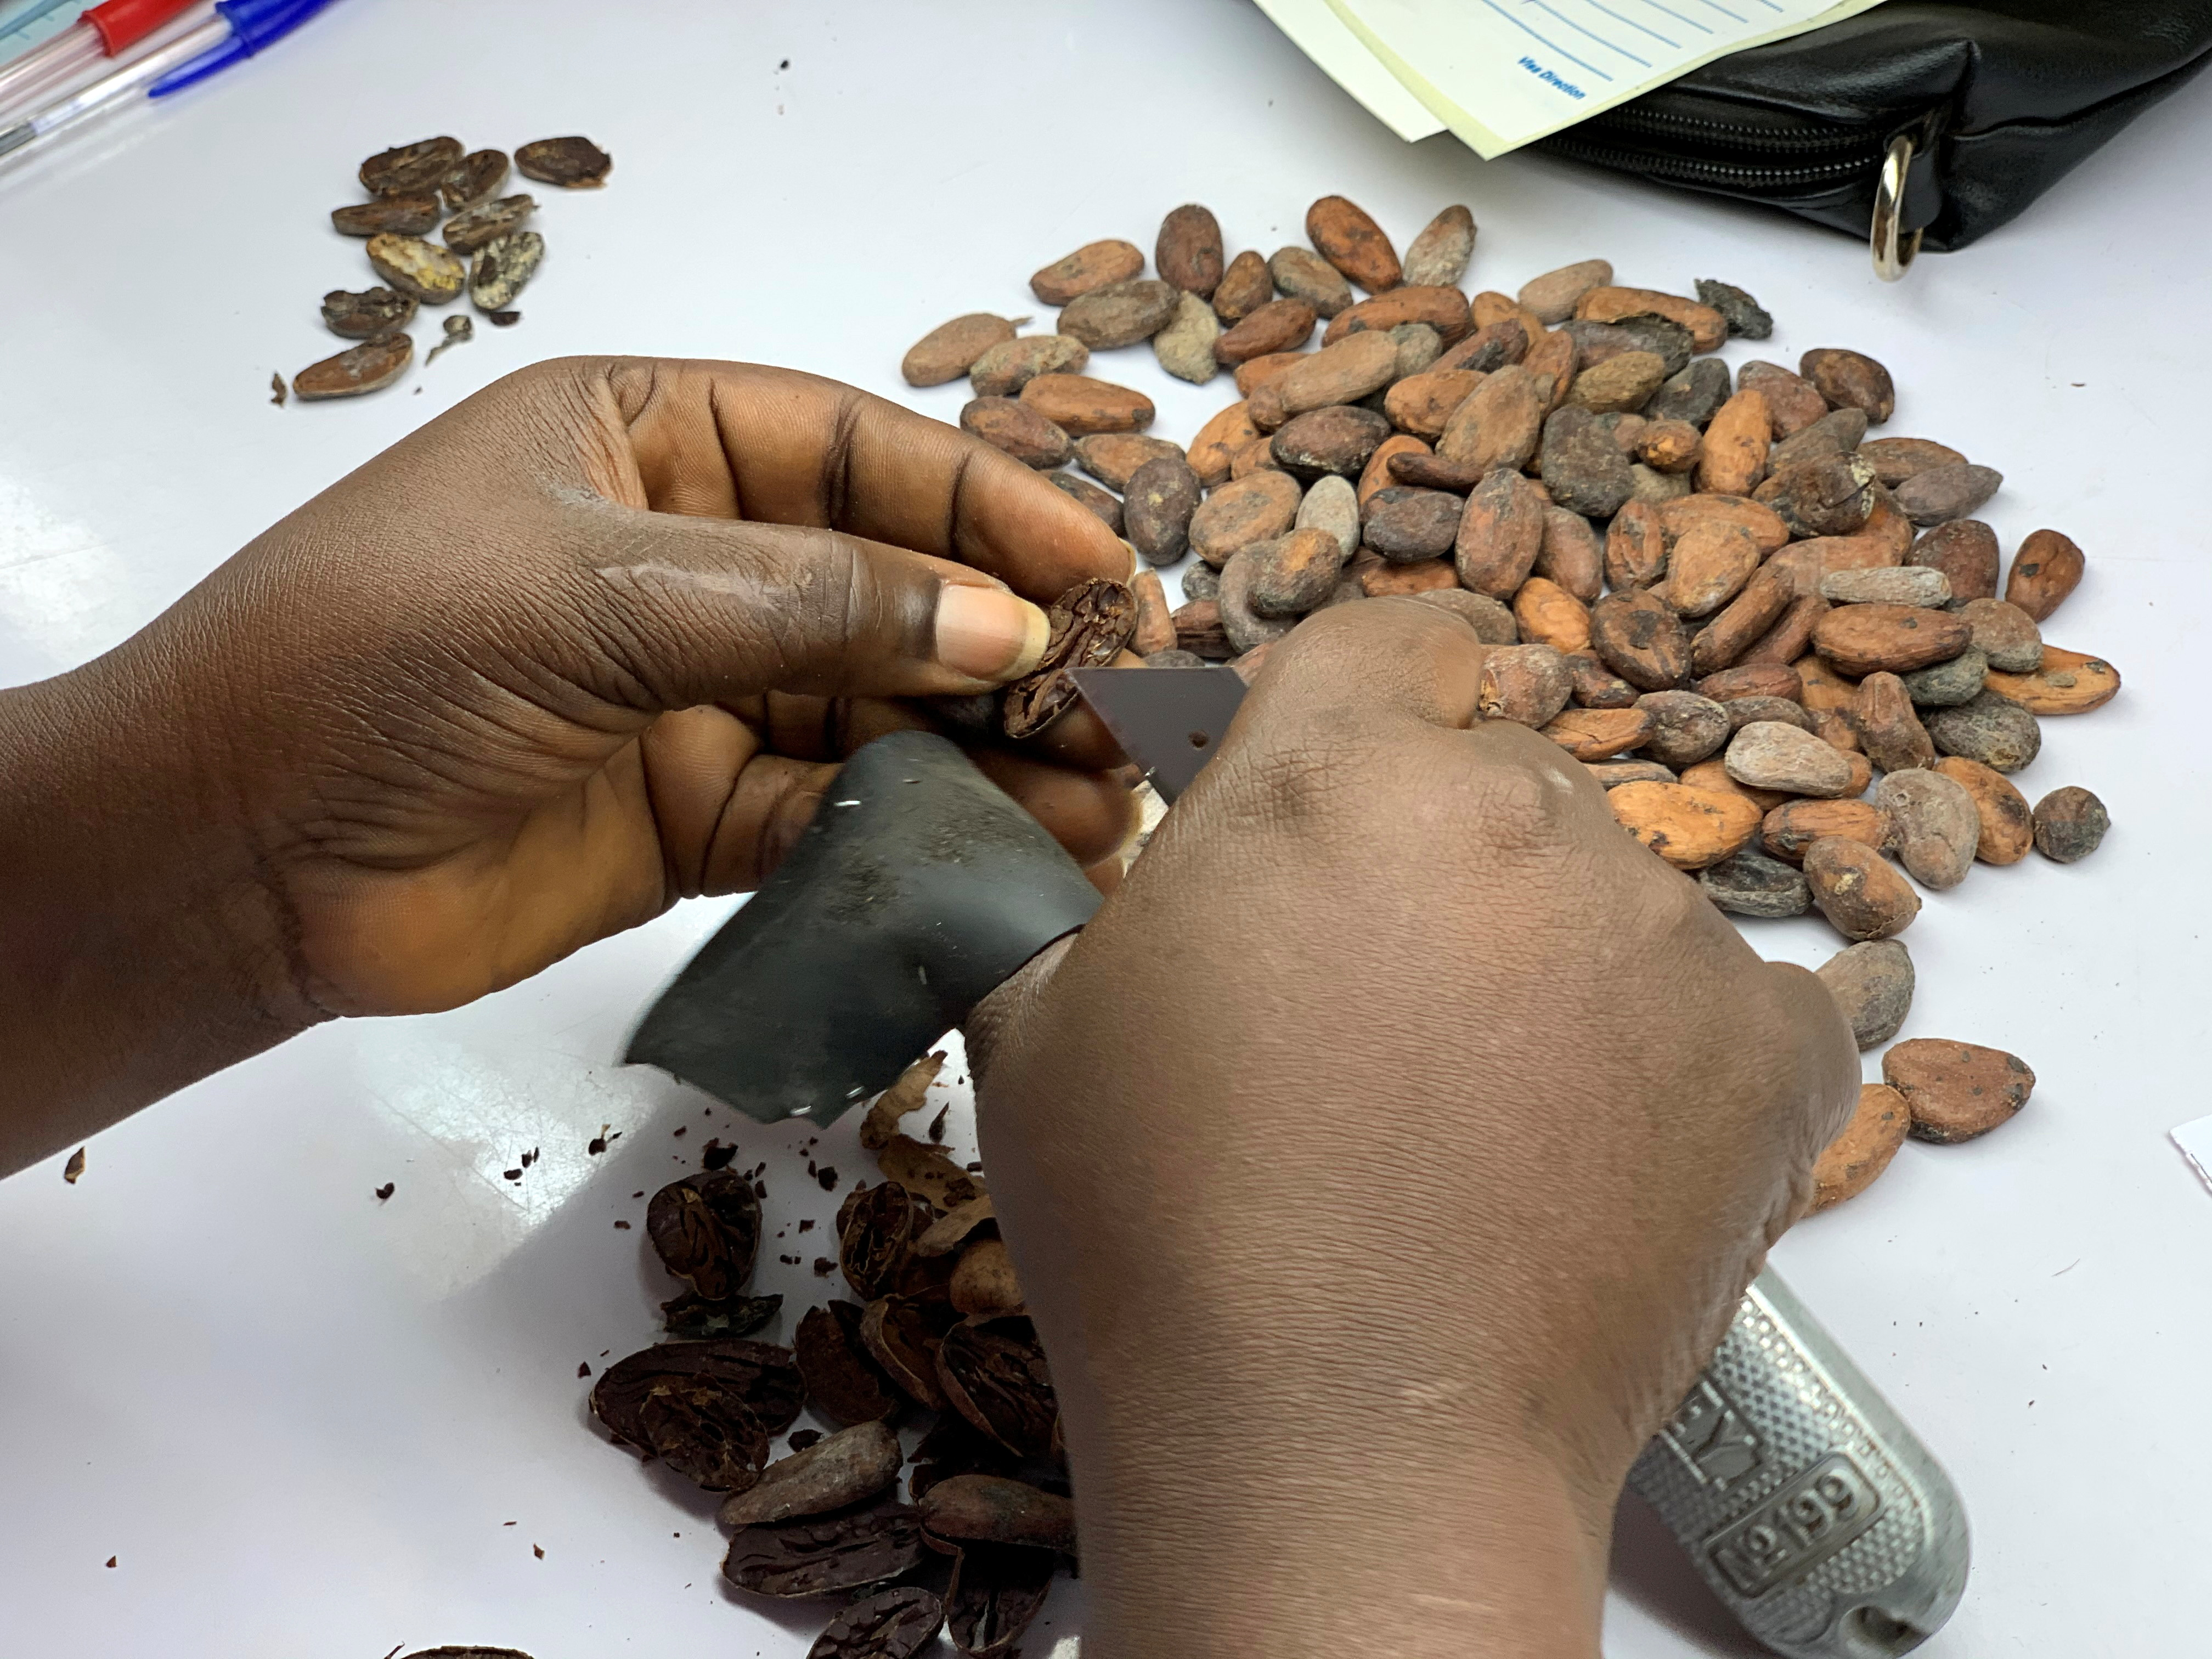 A worker handles cocoa beans at a warehouses in San Pedro